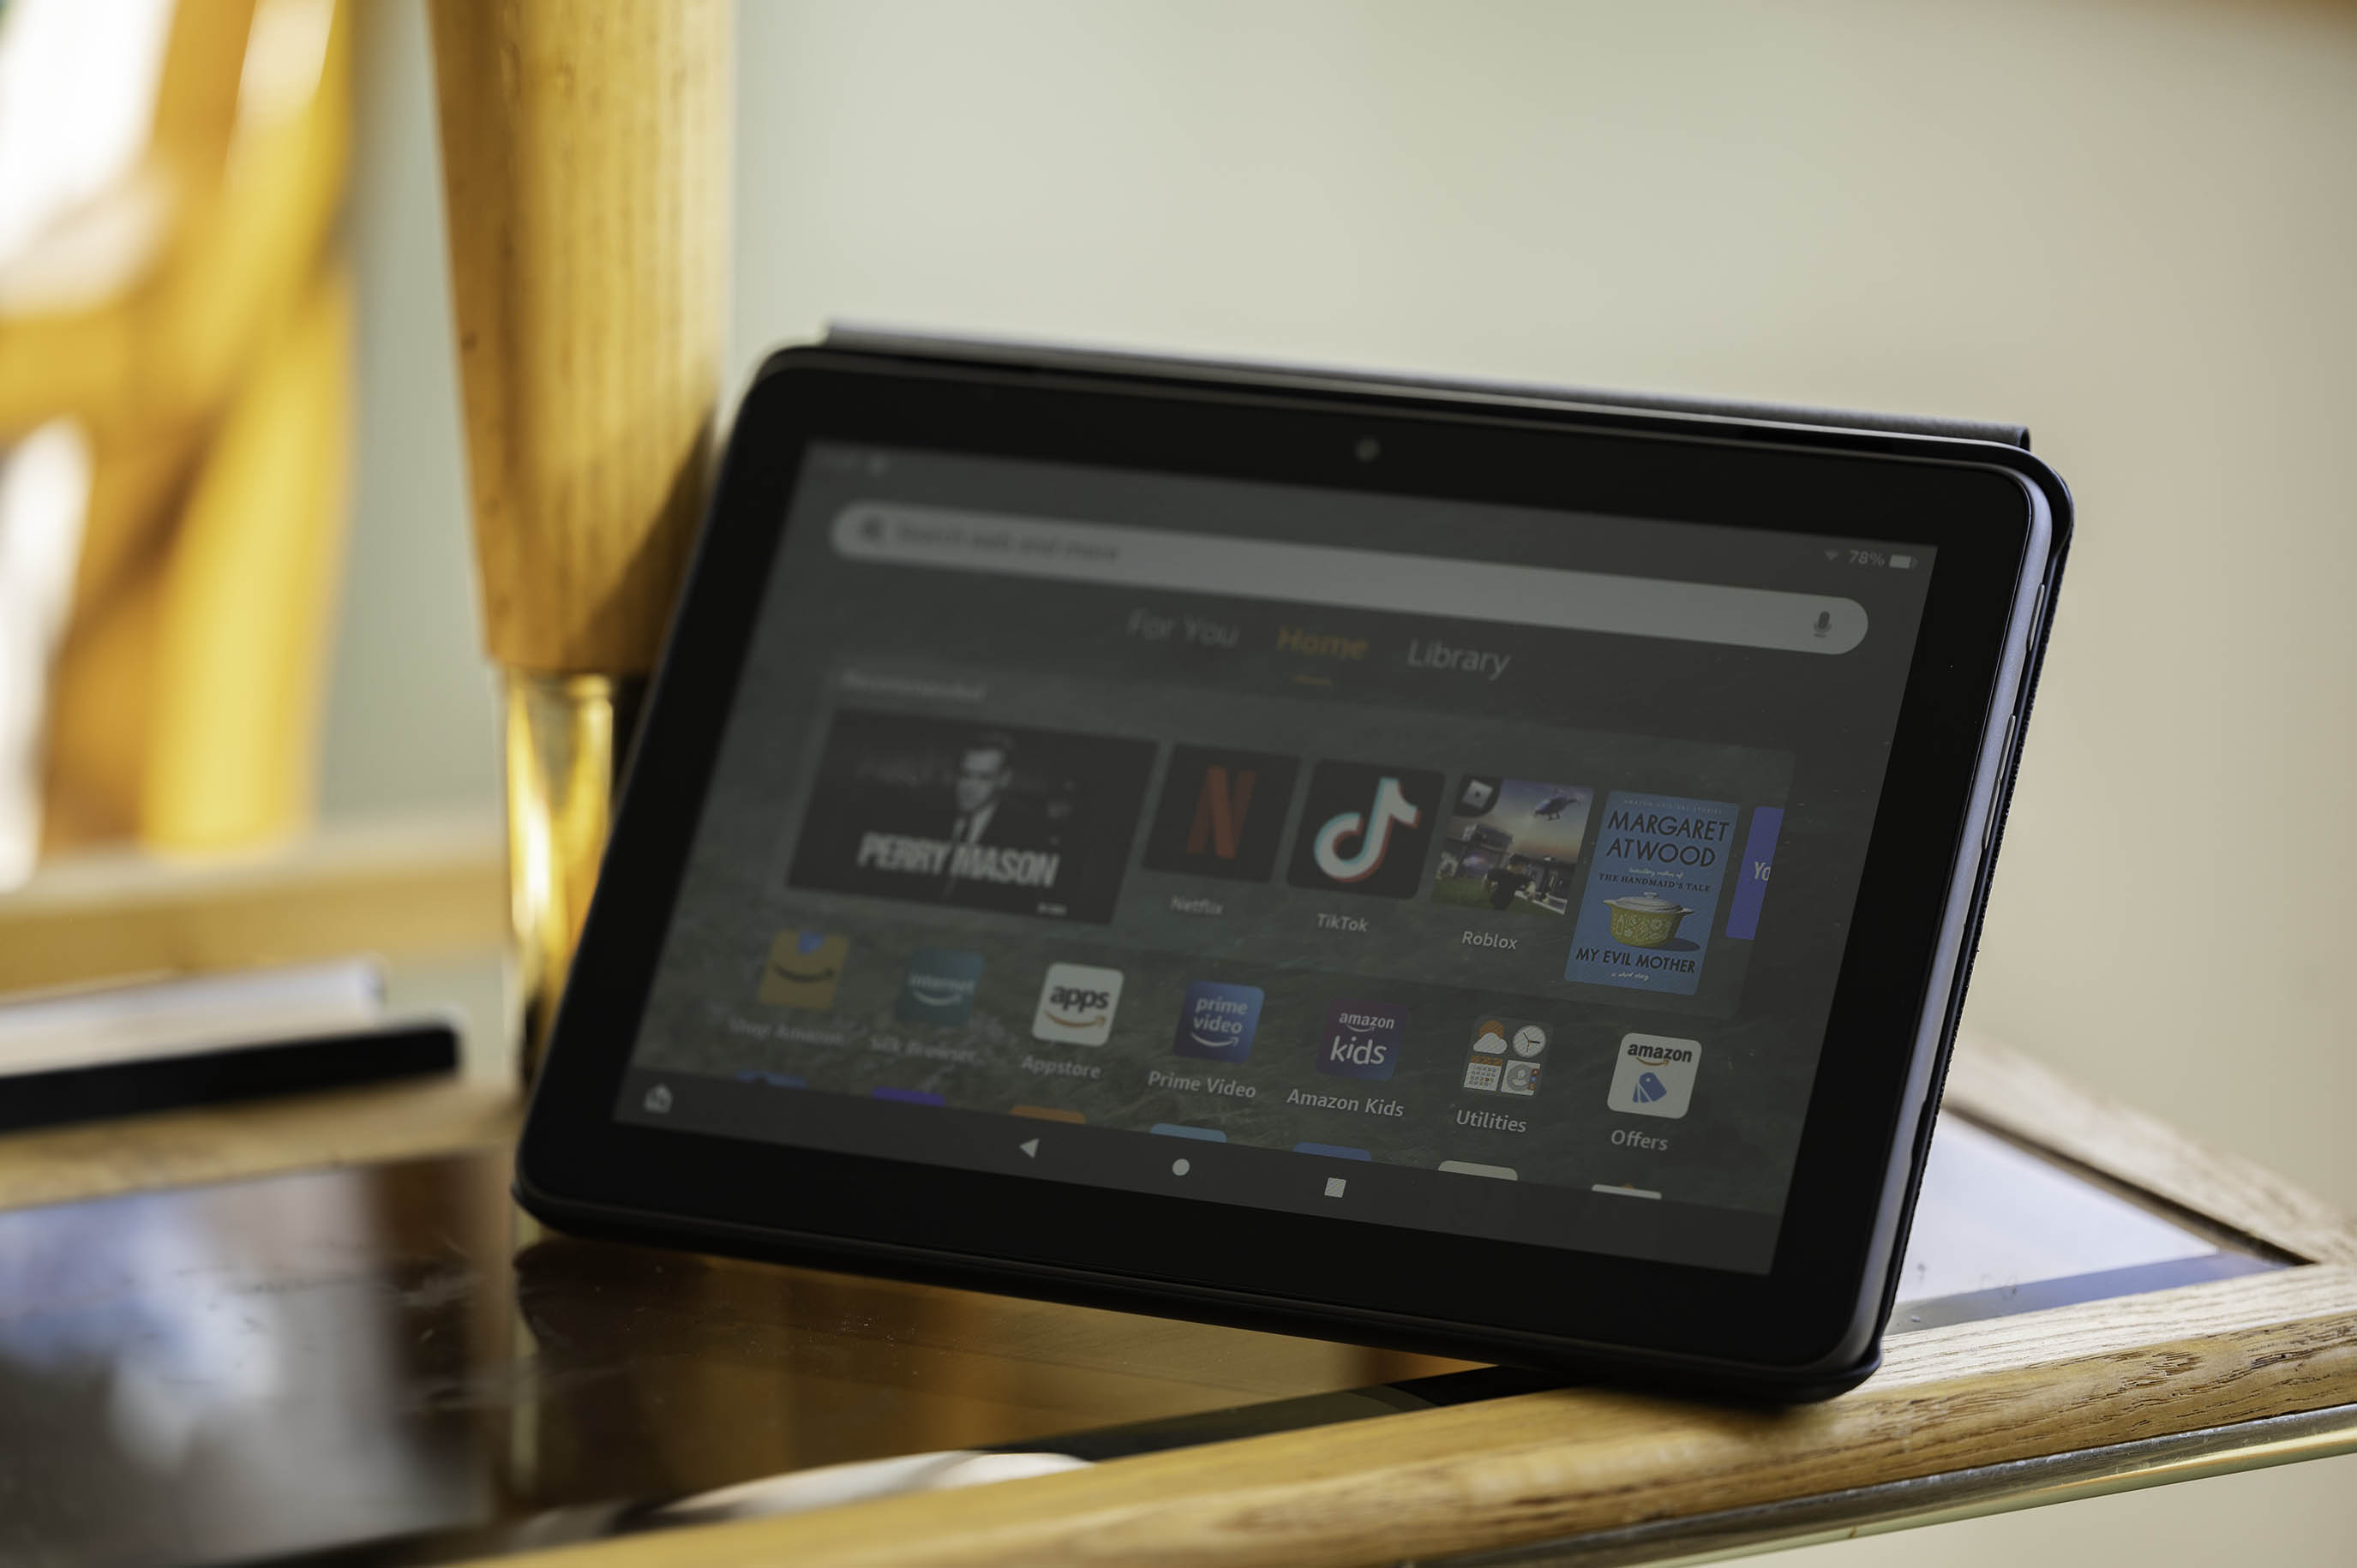 Fire HD 8 Plus review: How does the affordable tablet